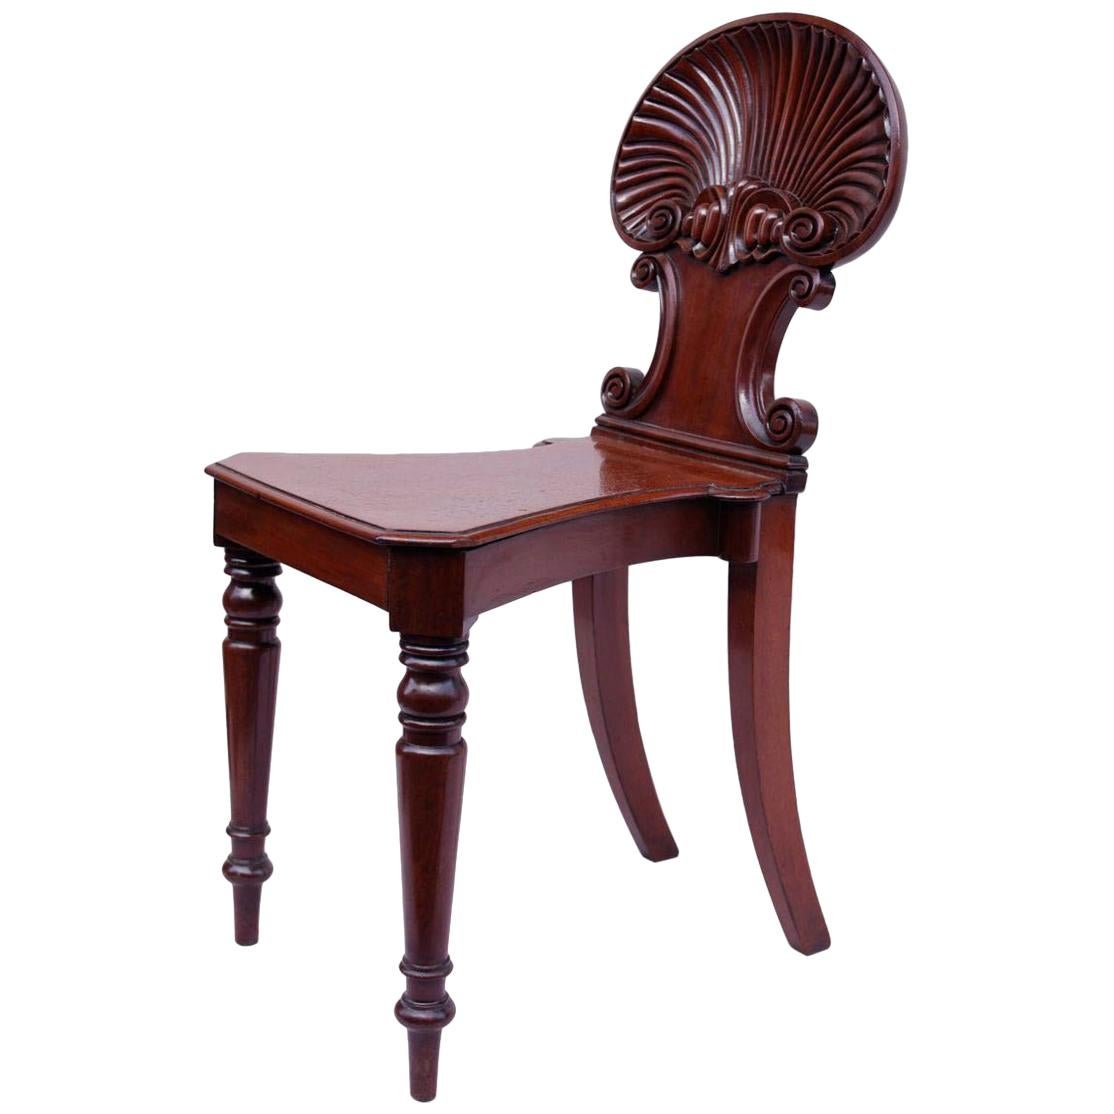 Regency Style Hall-Chair, Shell-Back, Gillows Model, Late 19th Century